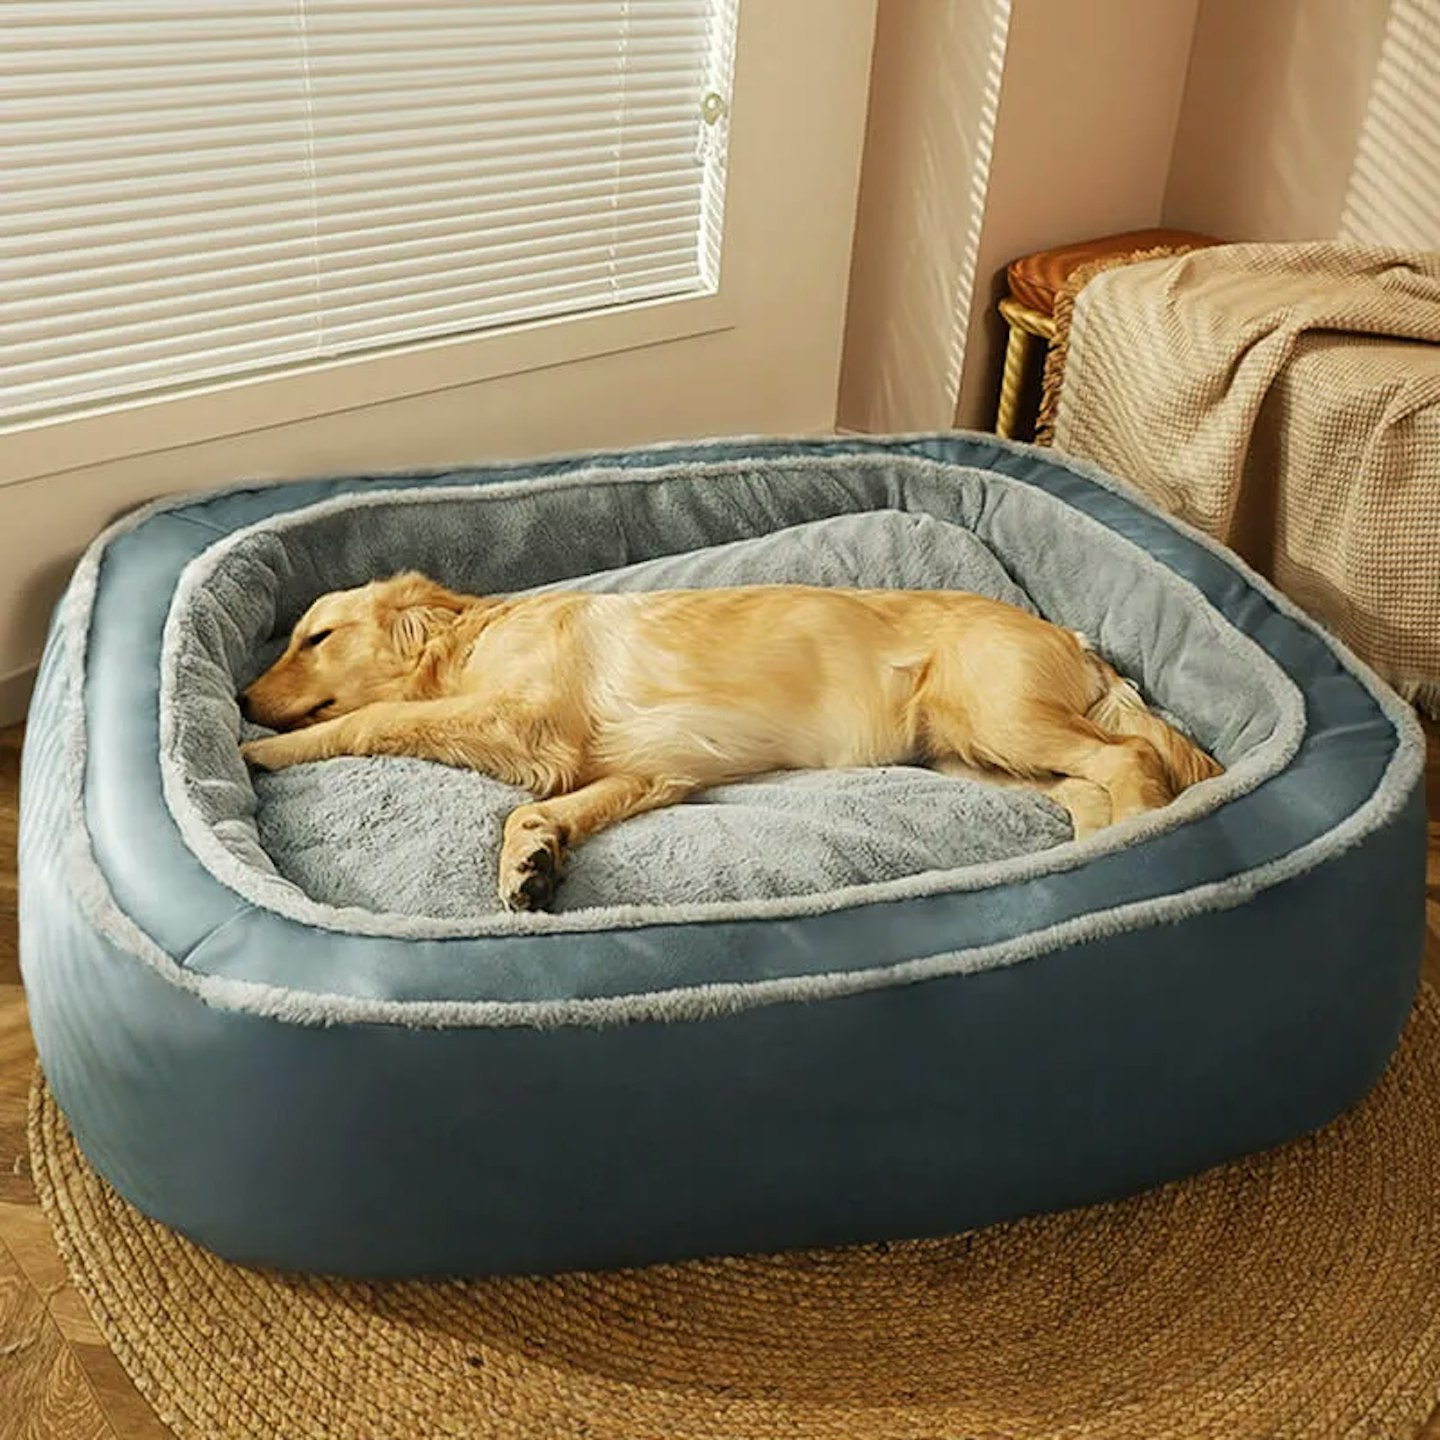 Best orthopaedic dog bed for warmth